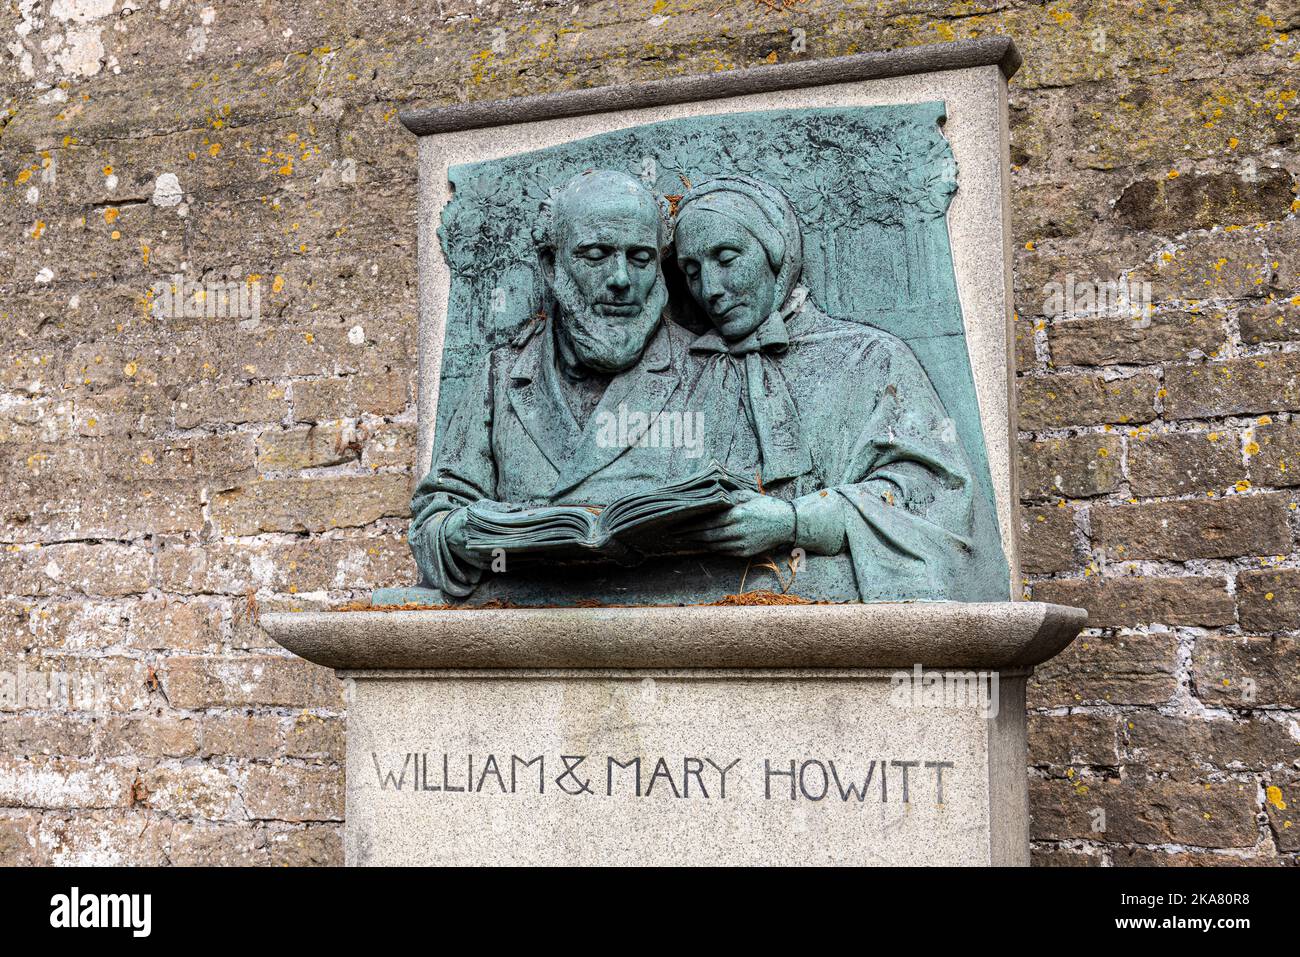 Statue of William & Mary Howitt, Small Walled Garden, Newstead Abbey, Nottinghamshire, England, UK Stock Photo